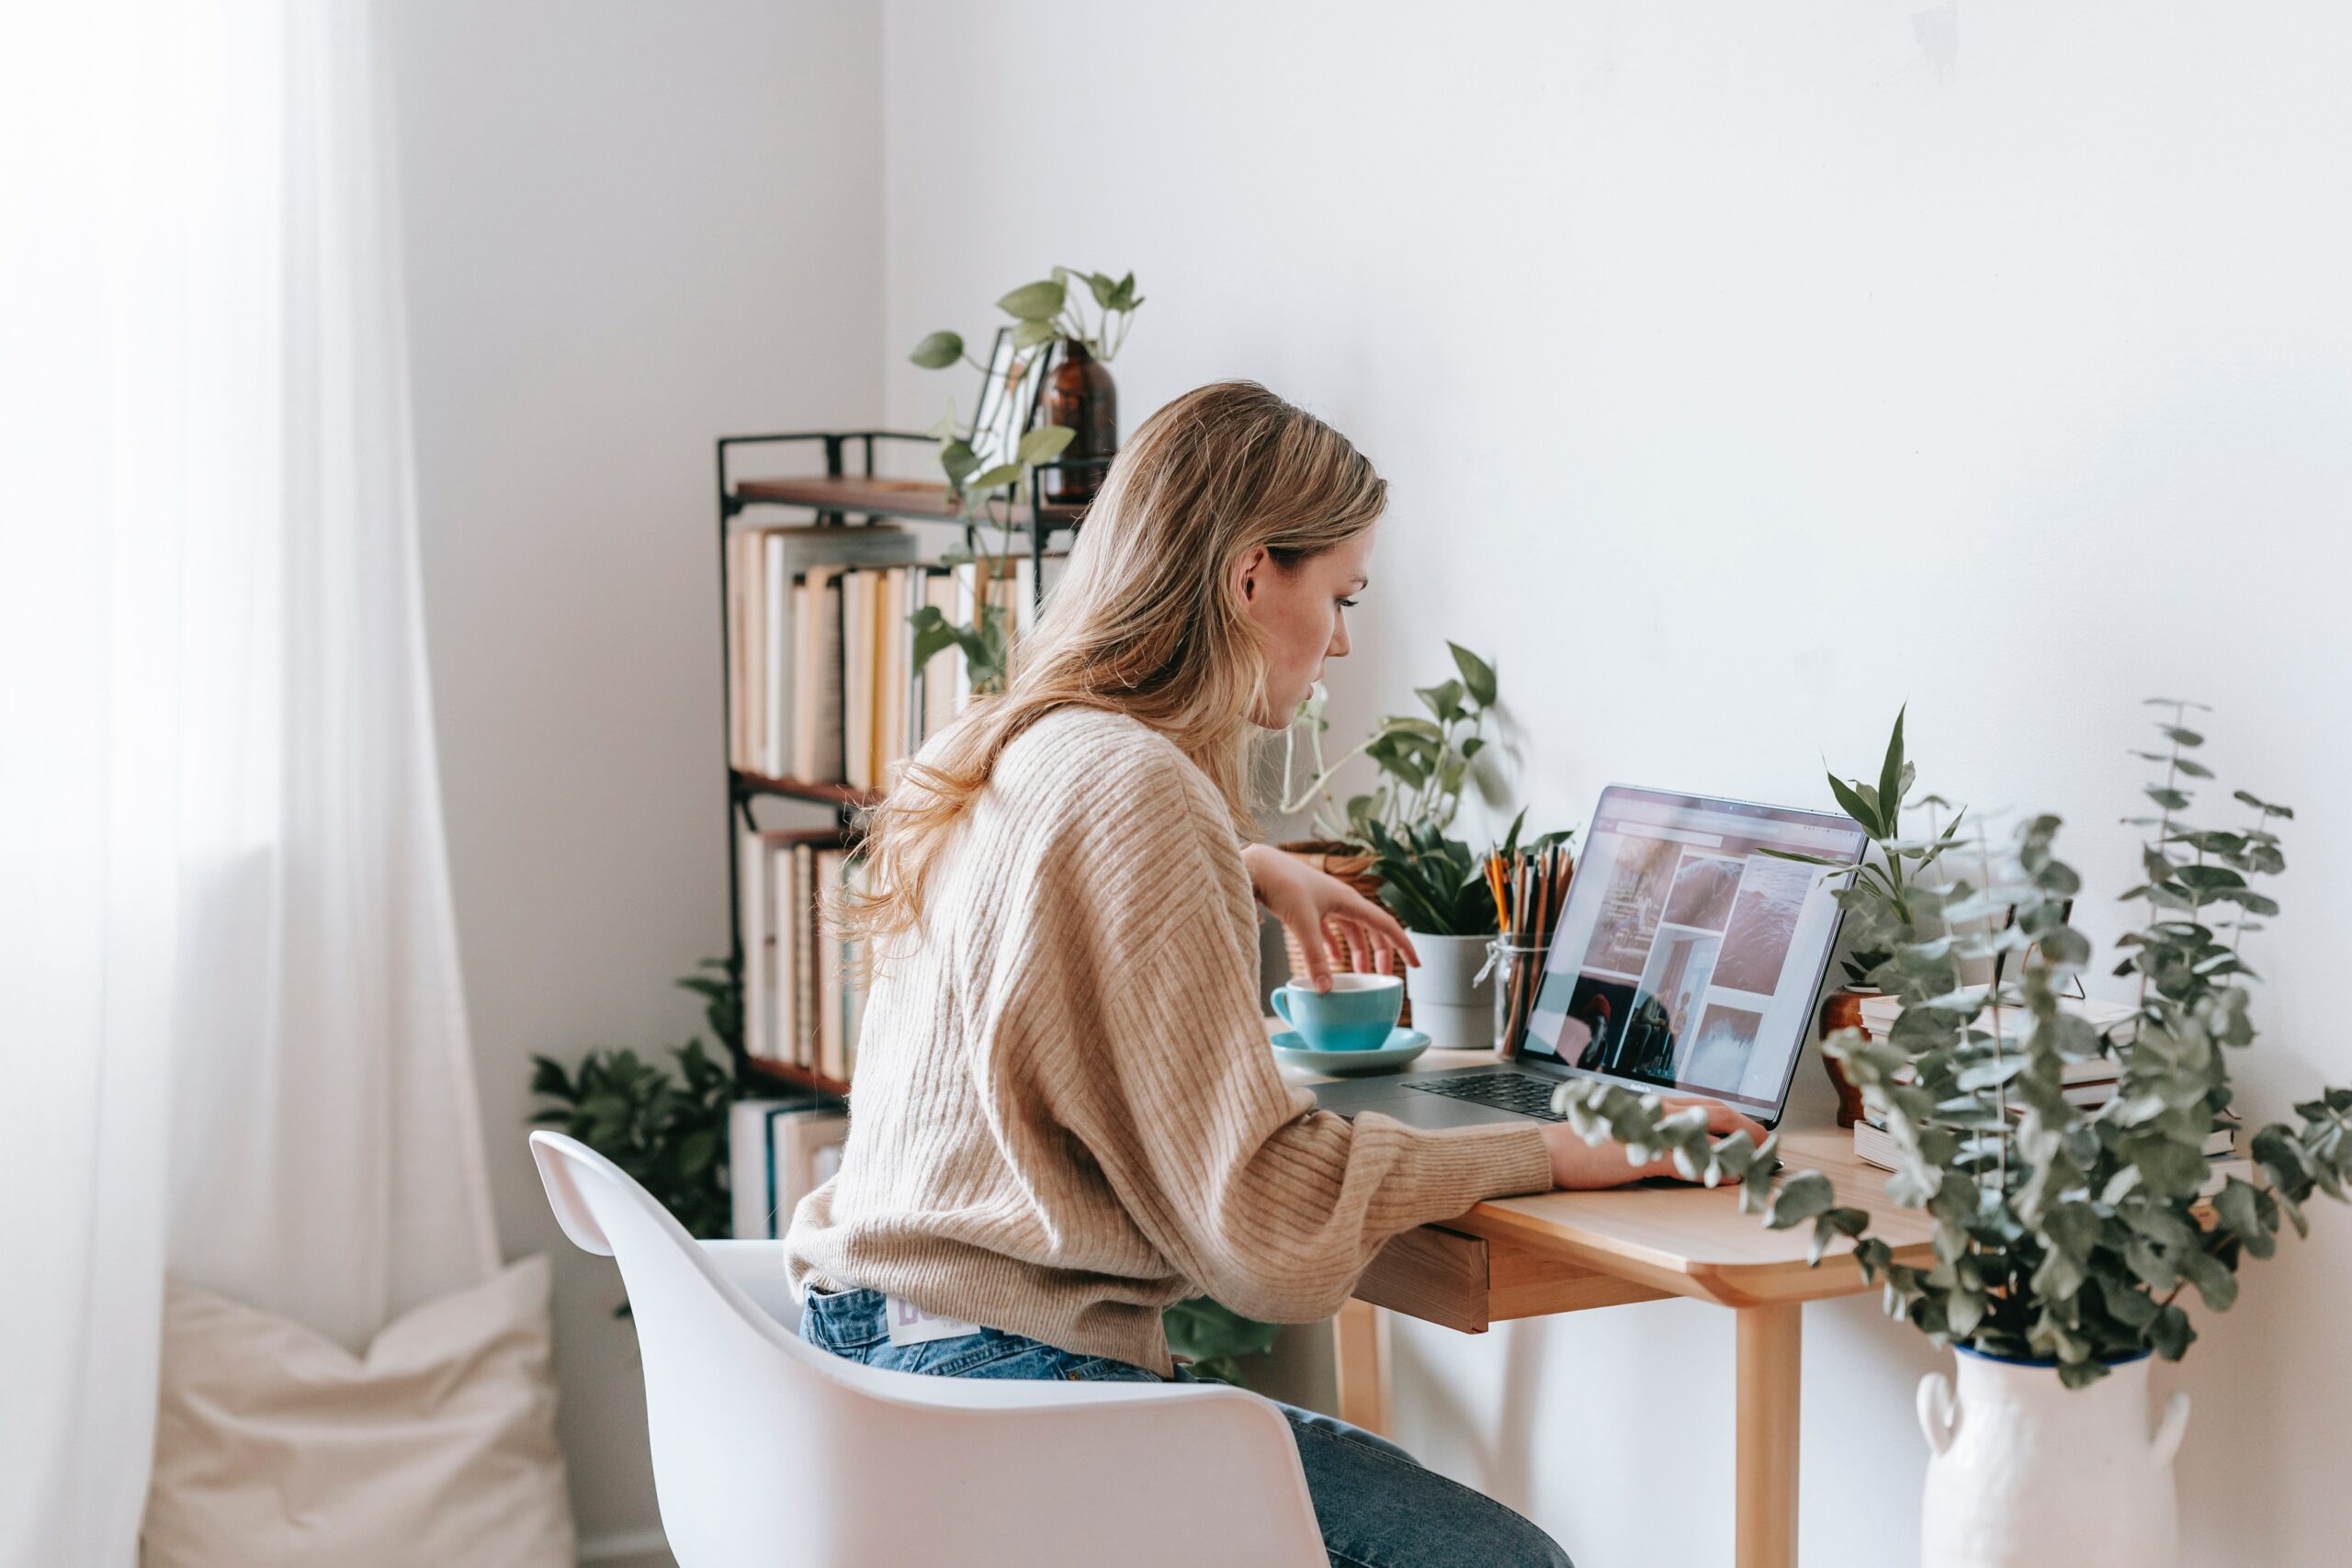 Latest CX Trends - Working in home office